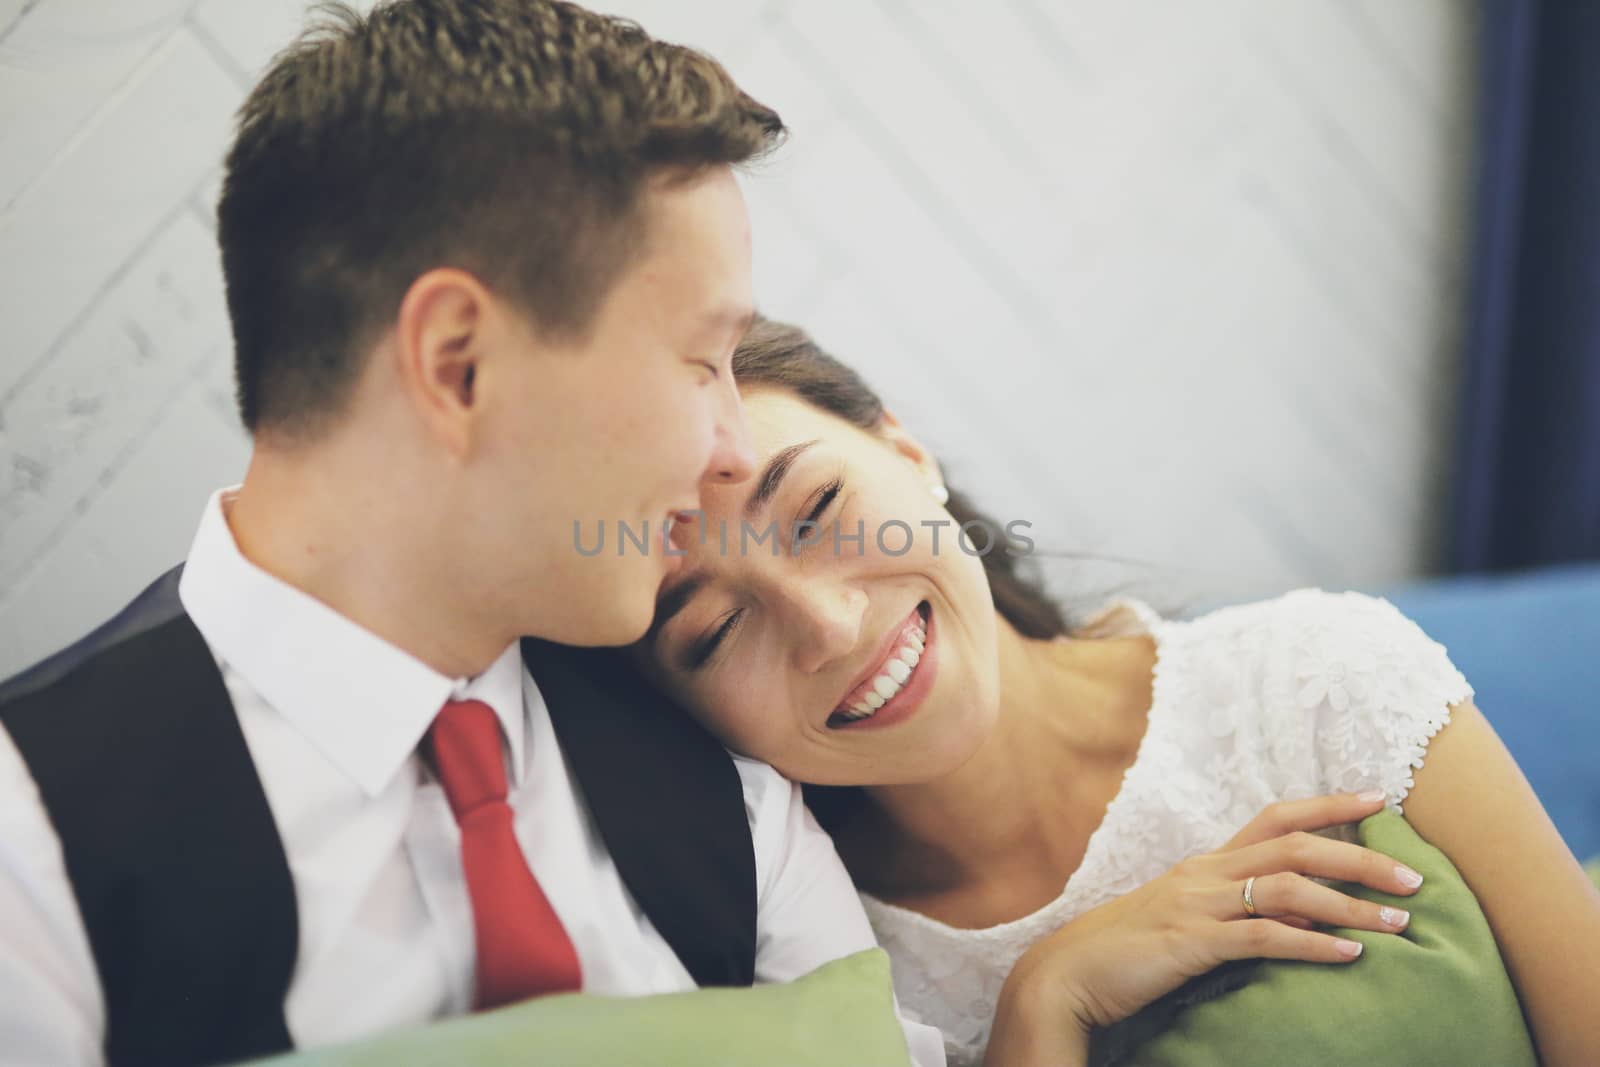 The bride and groom are smiling. Wedding. Happy family concept. High quality photo